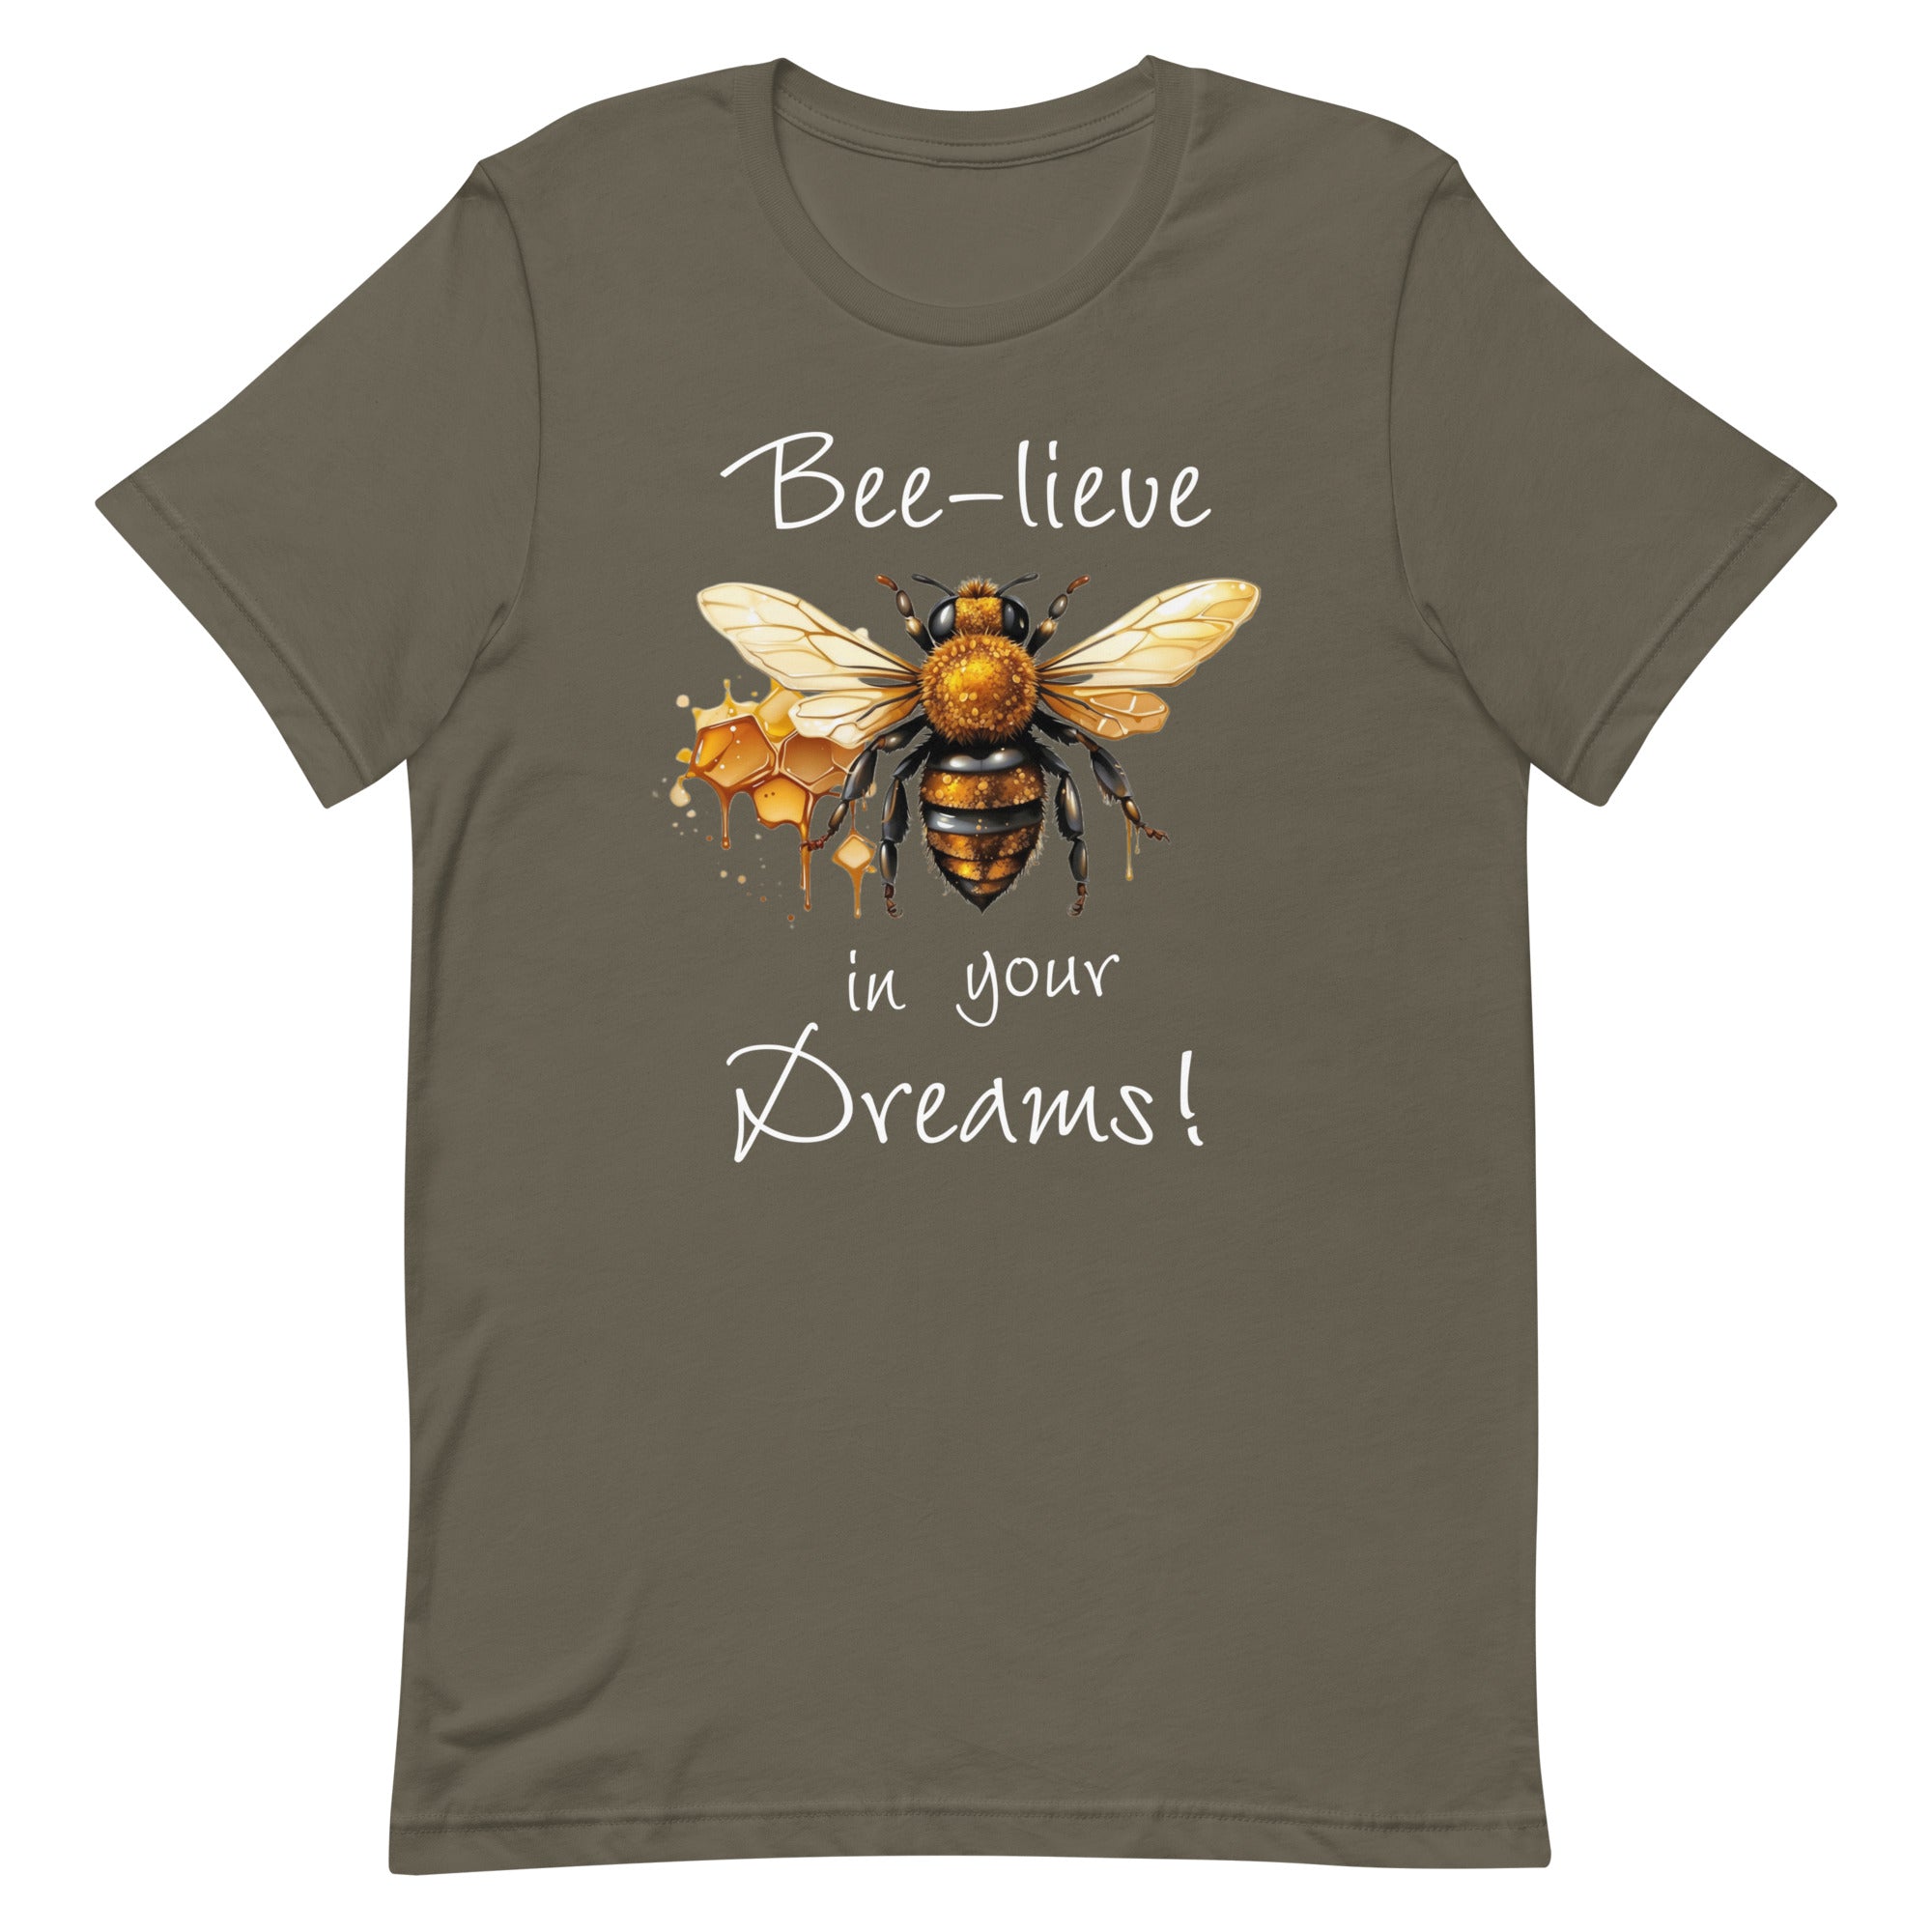 Bee-lieve in Your Dreams T-Shirt, Gift for Bee Lovers Army S L M XL DenBox